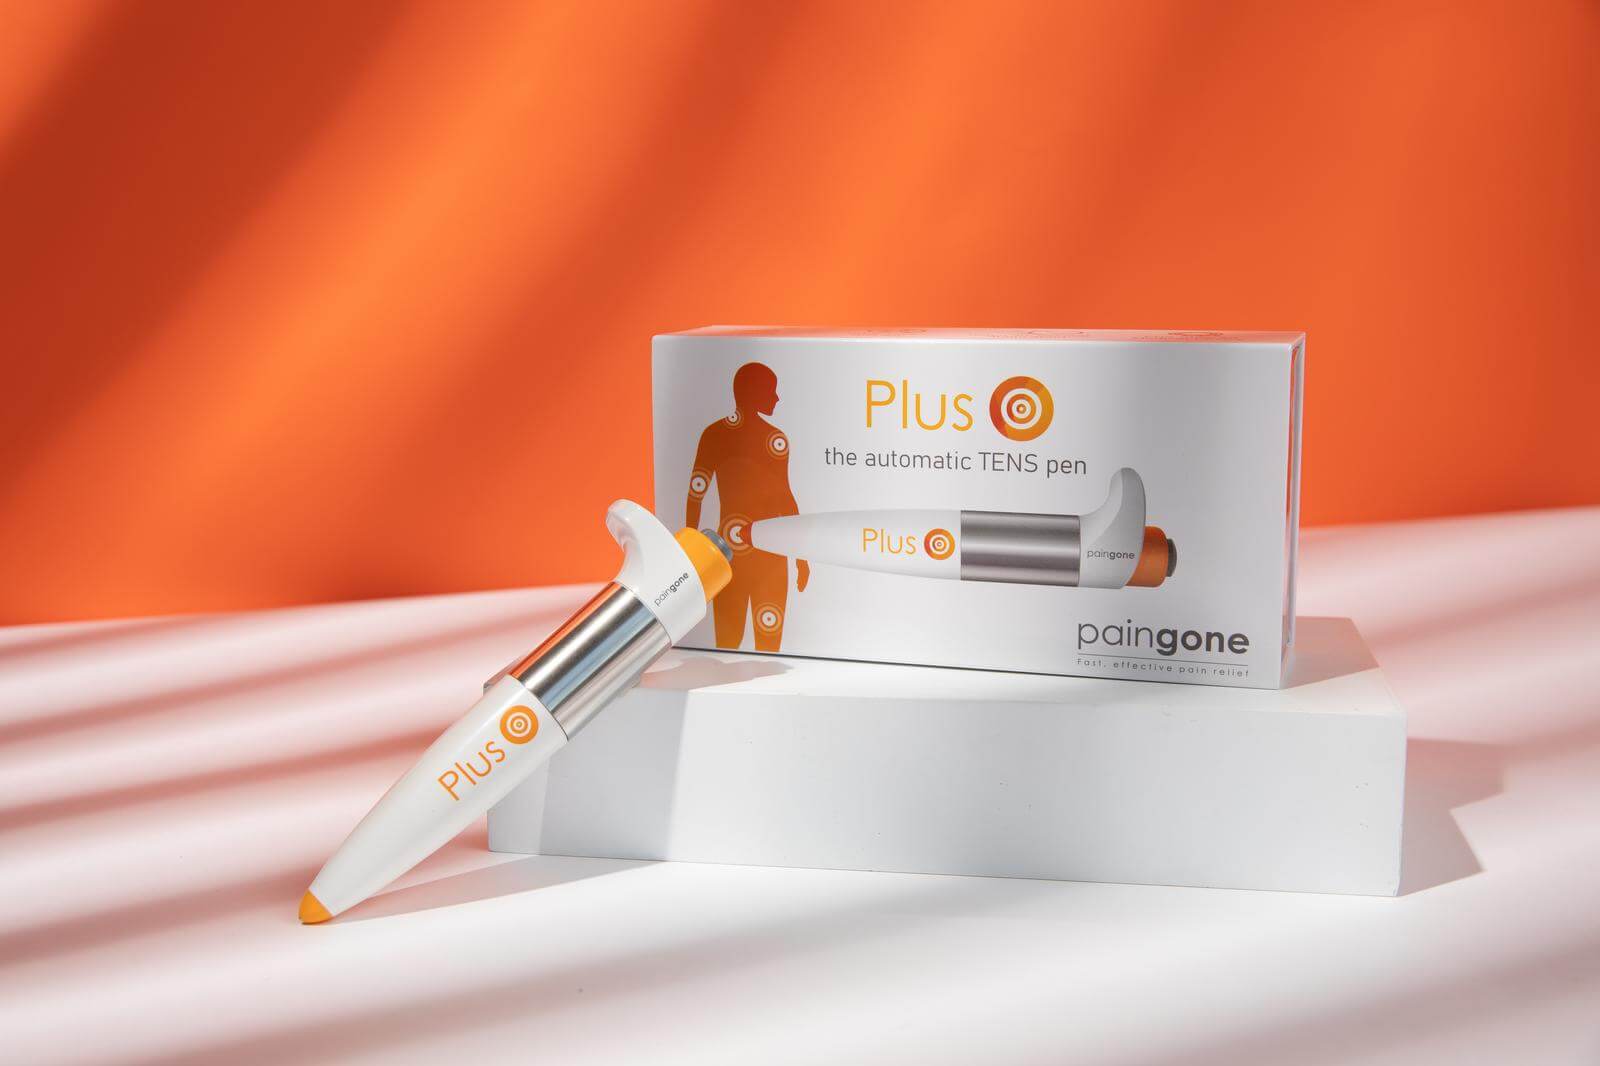 Paingone Plus Reviews - Does It Work? What They Won't Tell You Before Buy!